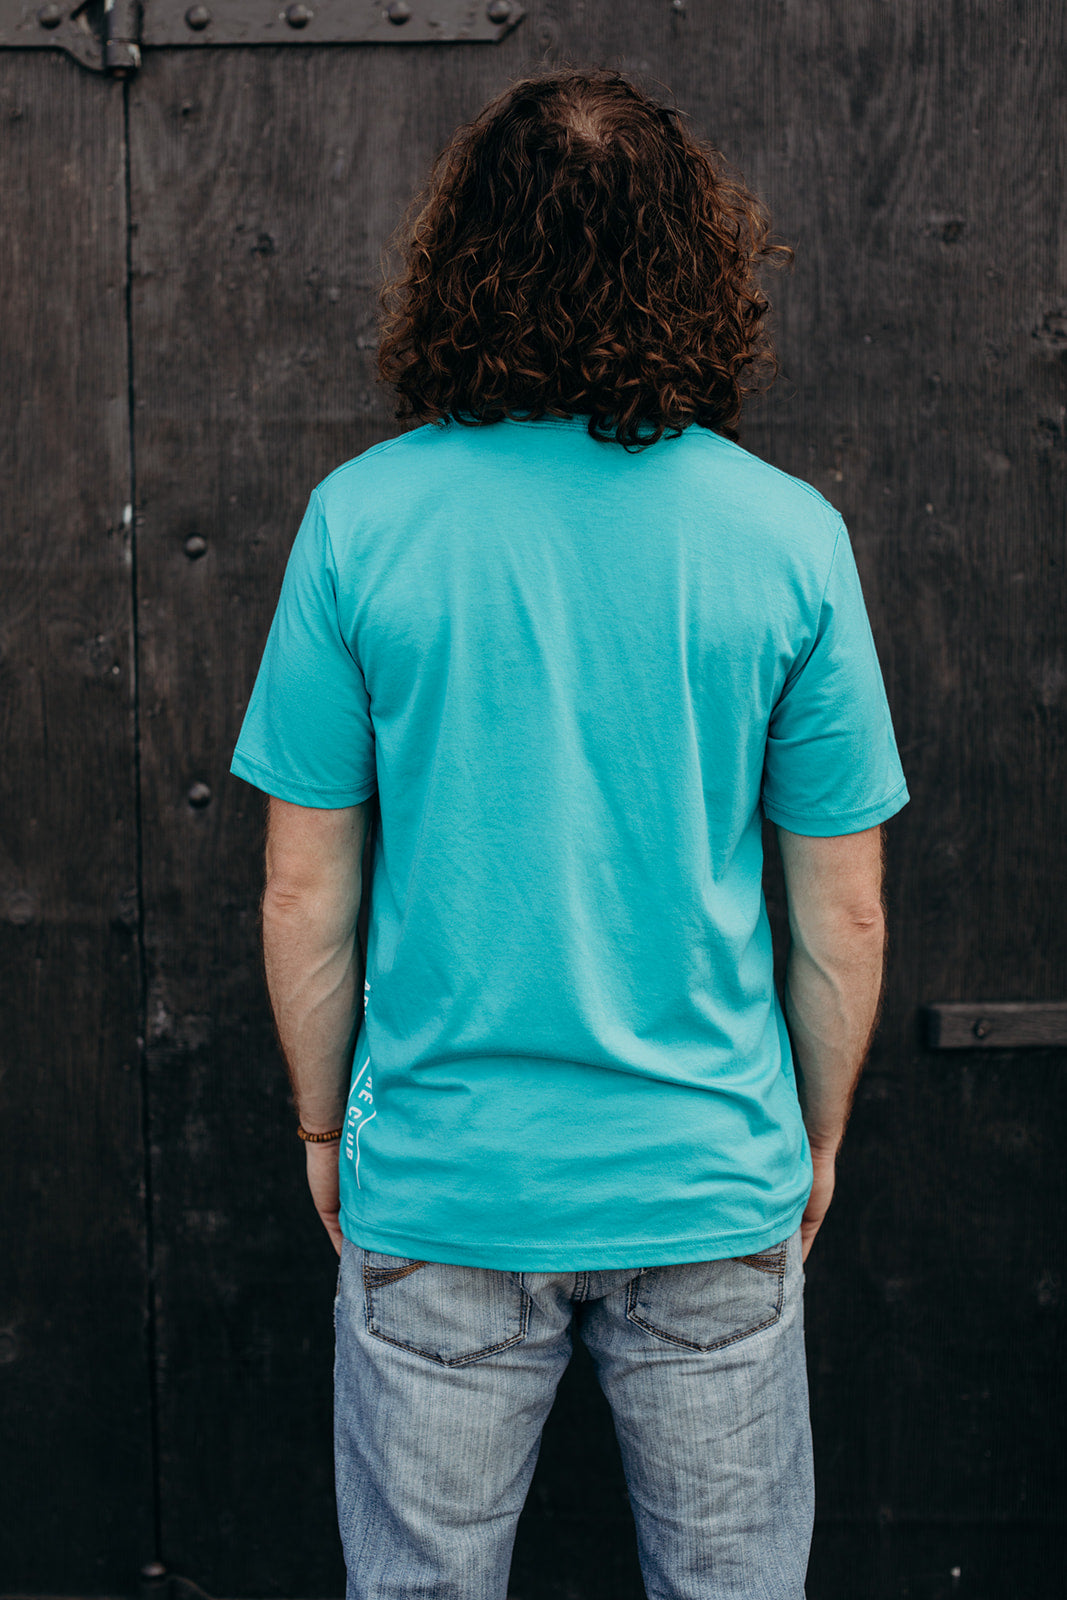 Men's organic teal t-shirt with white details